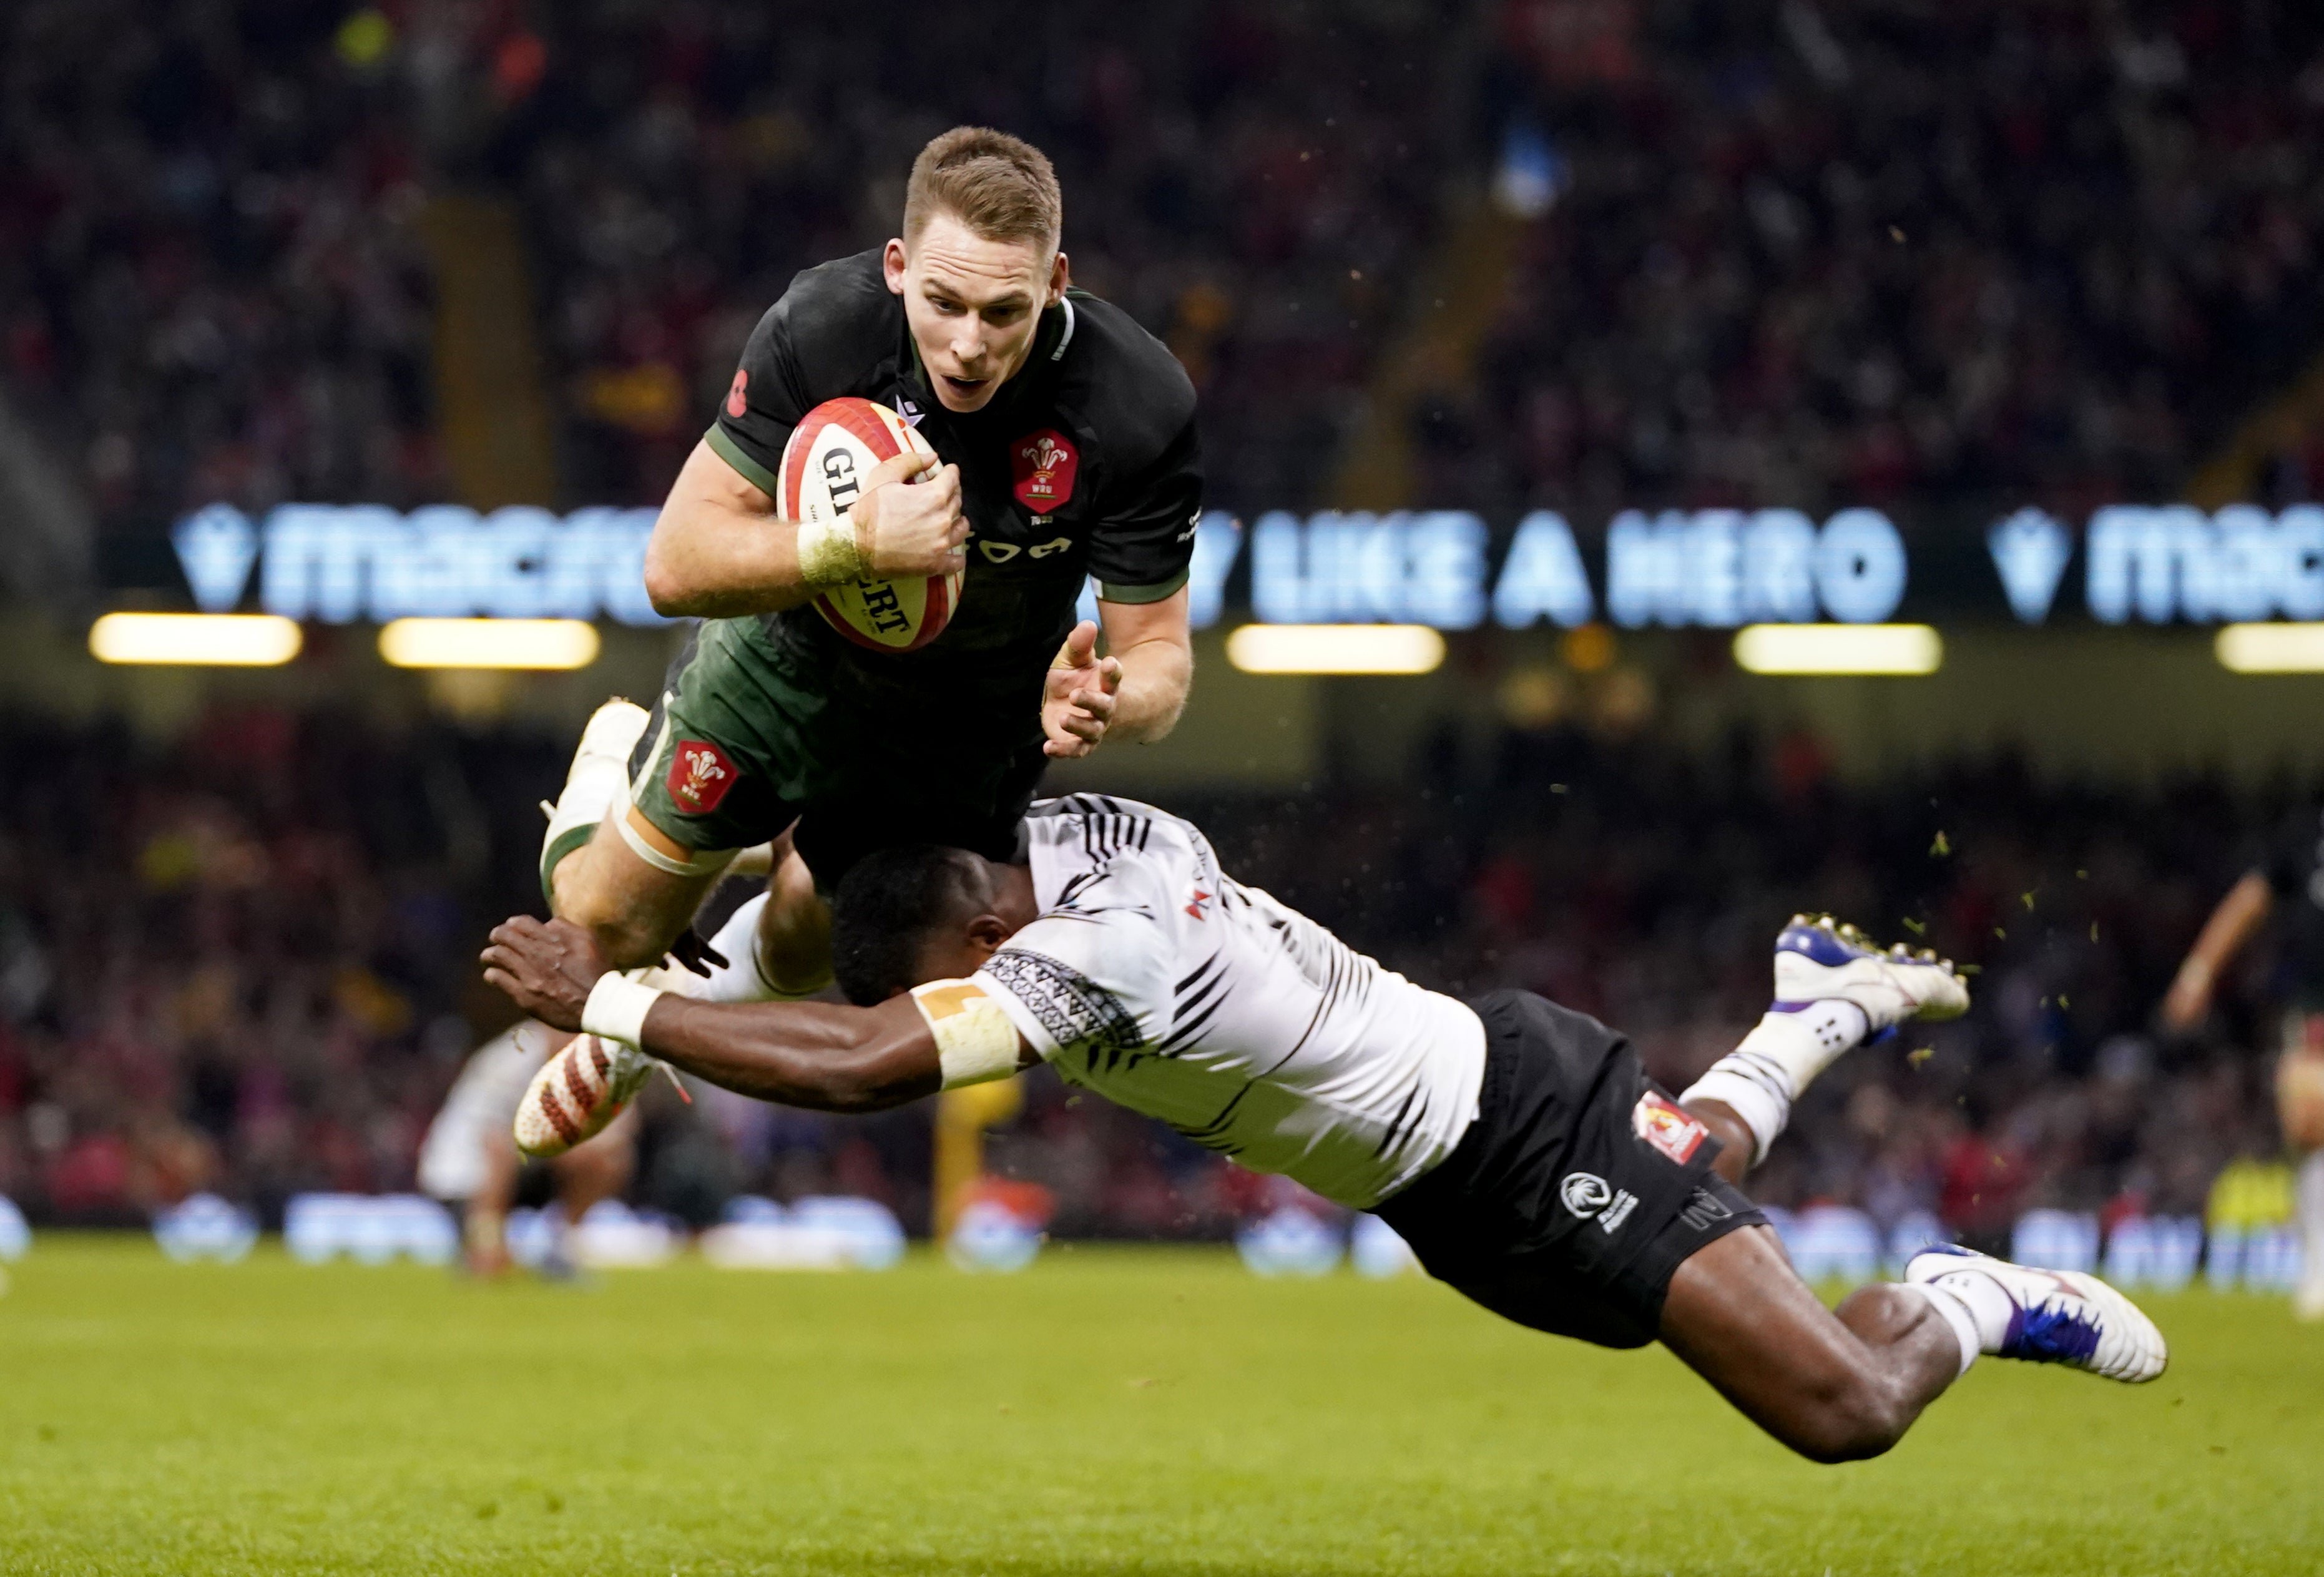 Liam Williams scores a try for Wales against Fiji (David Davies/PA)